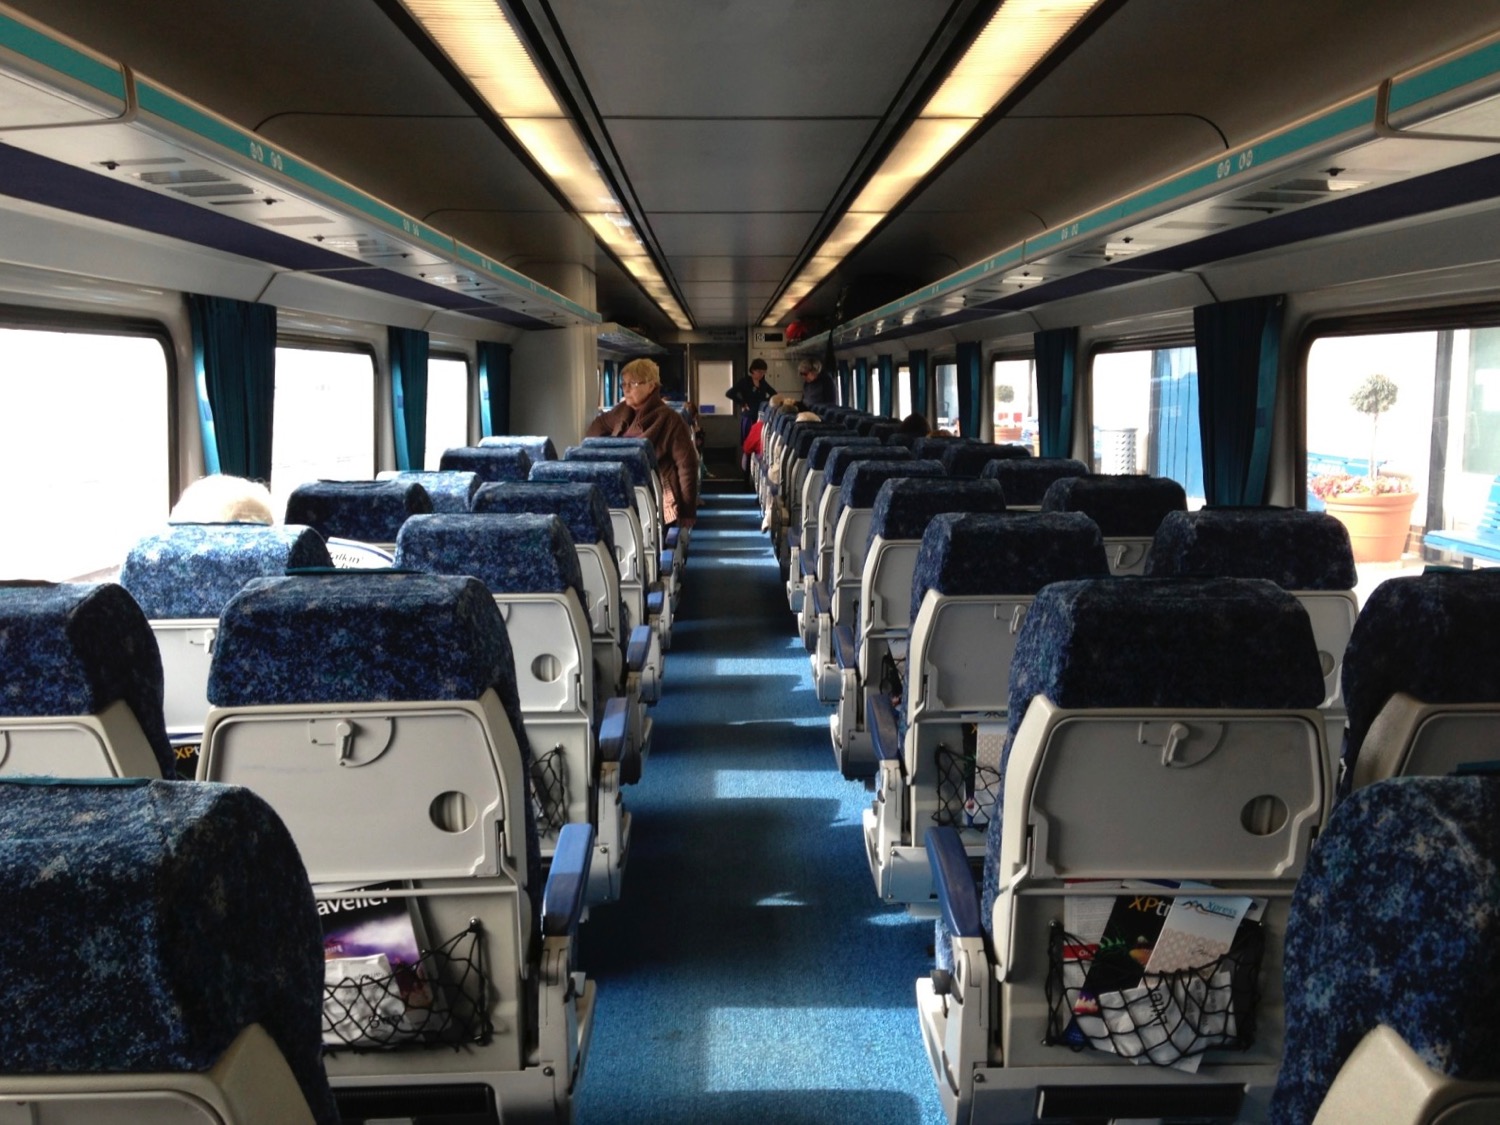 a train with blue seats